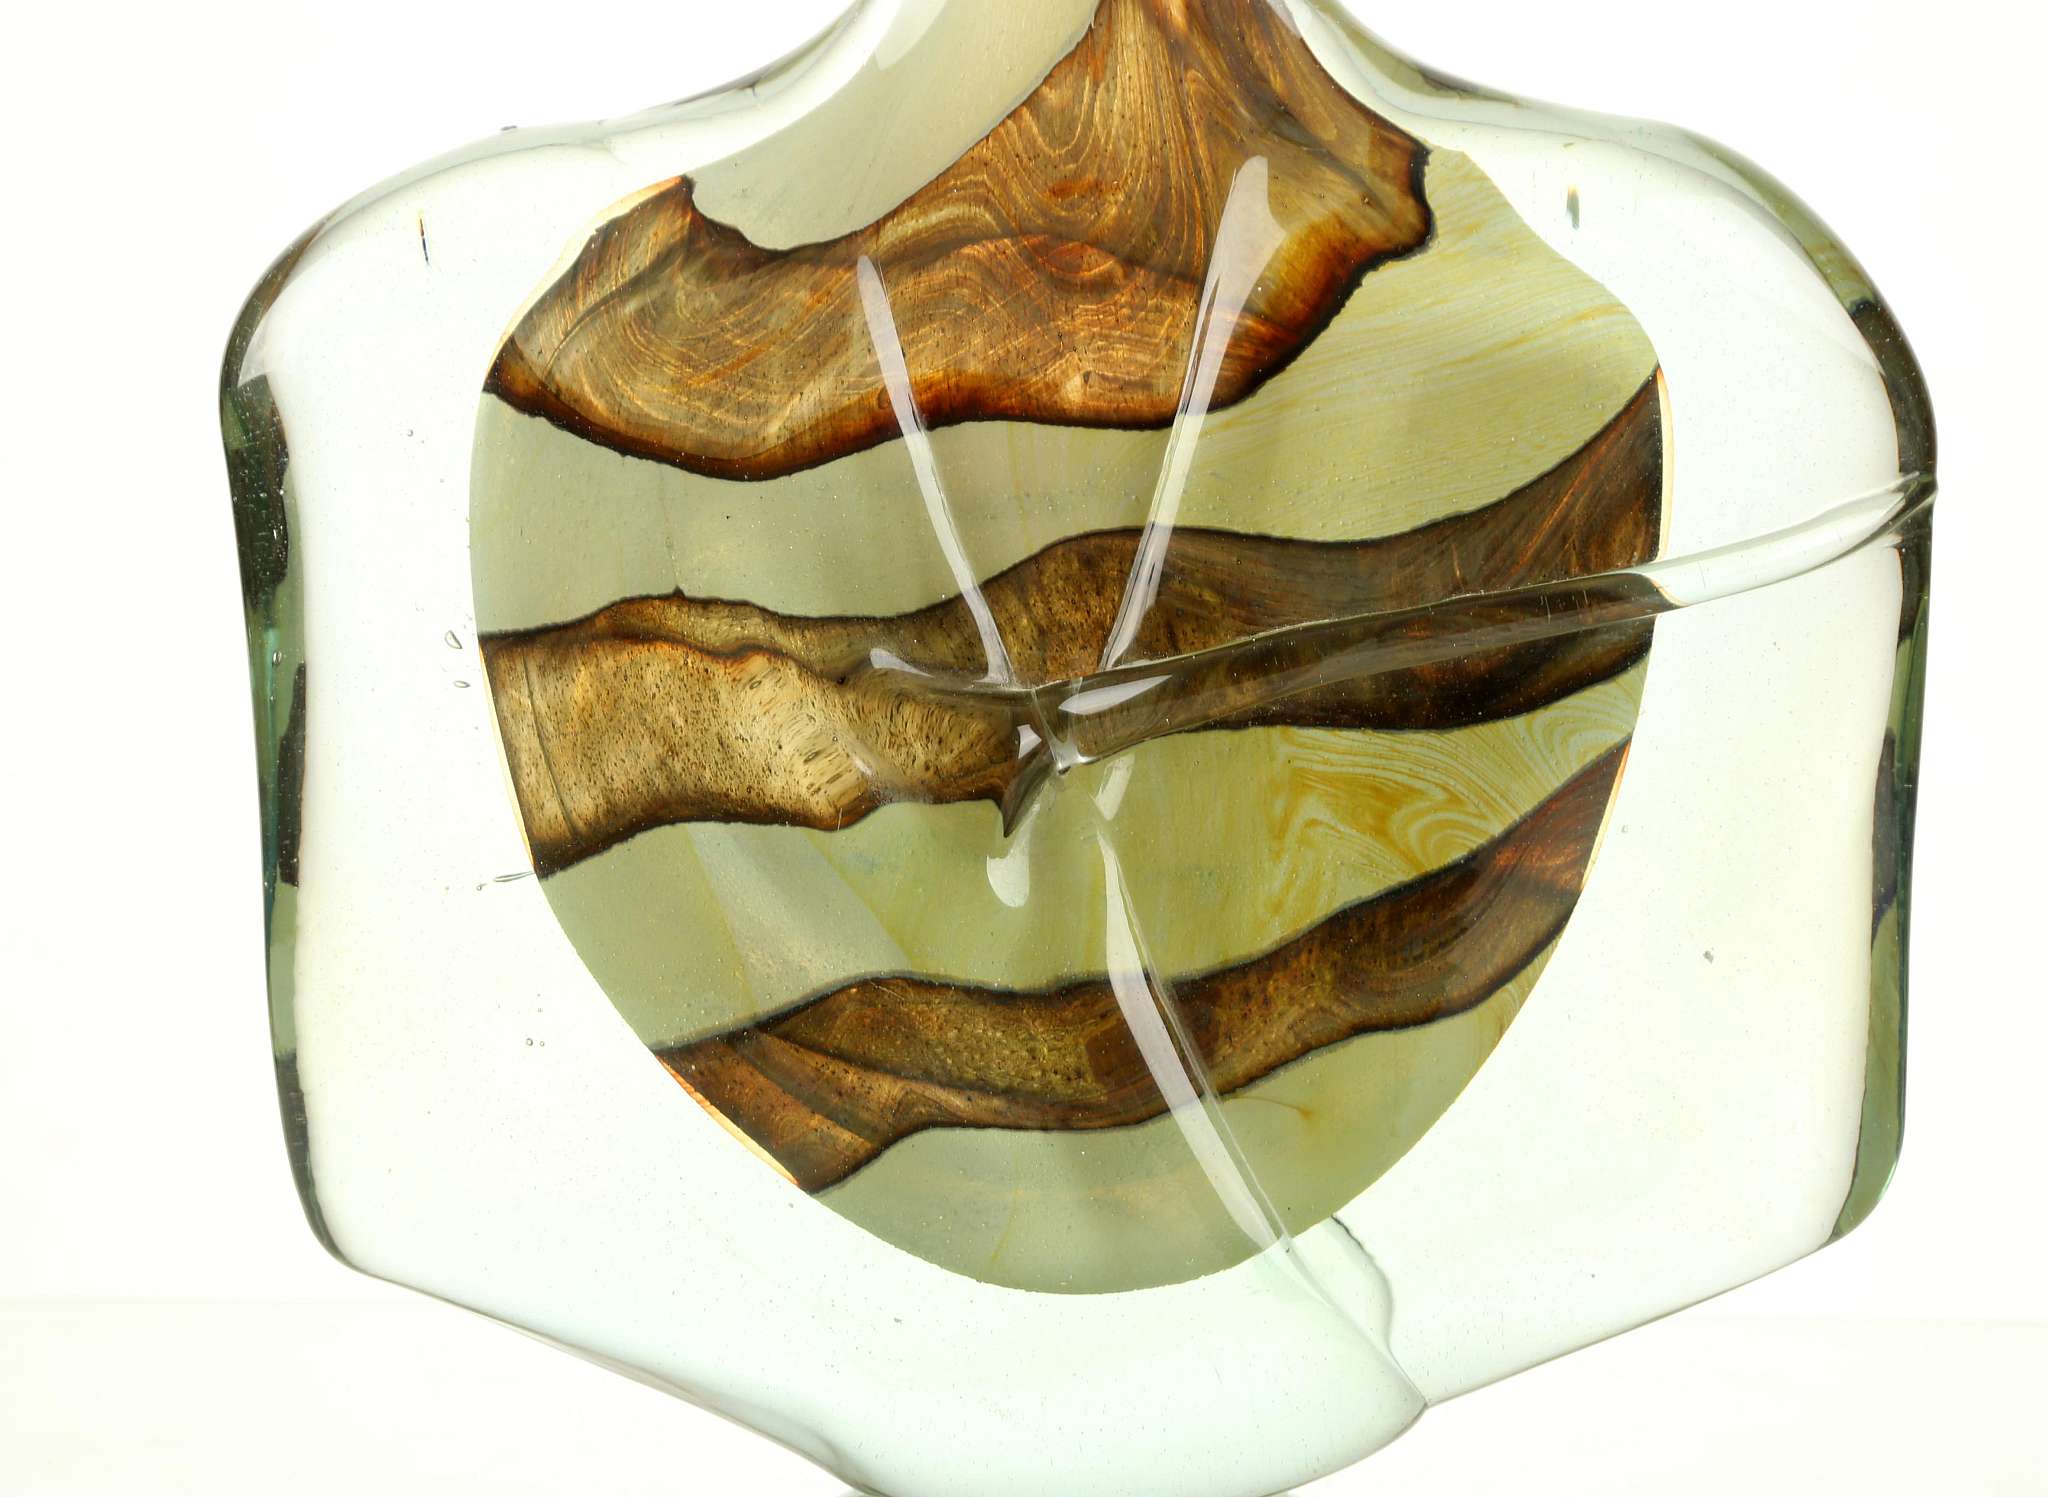 A MDINA FISH VASE, mid 20th century, green and brown clear cased glass, (21 x 27cm high) - Image 2 of 5